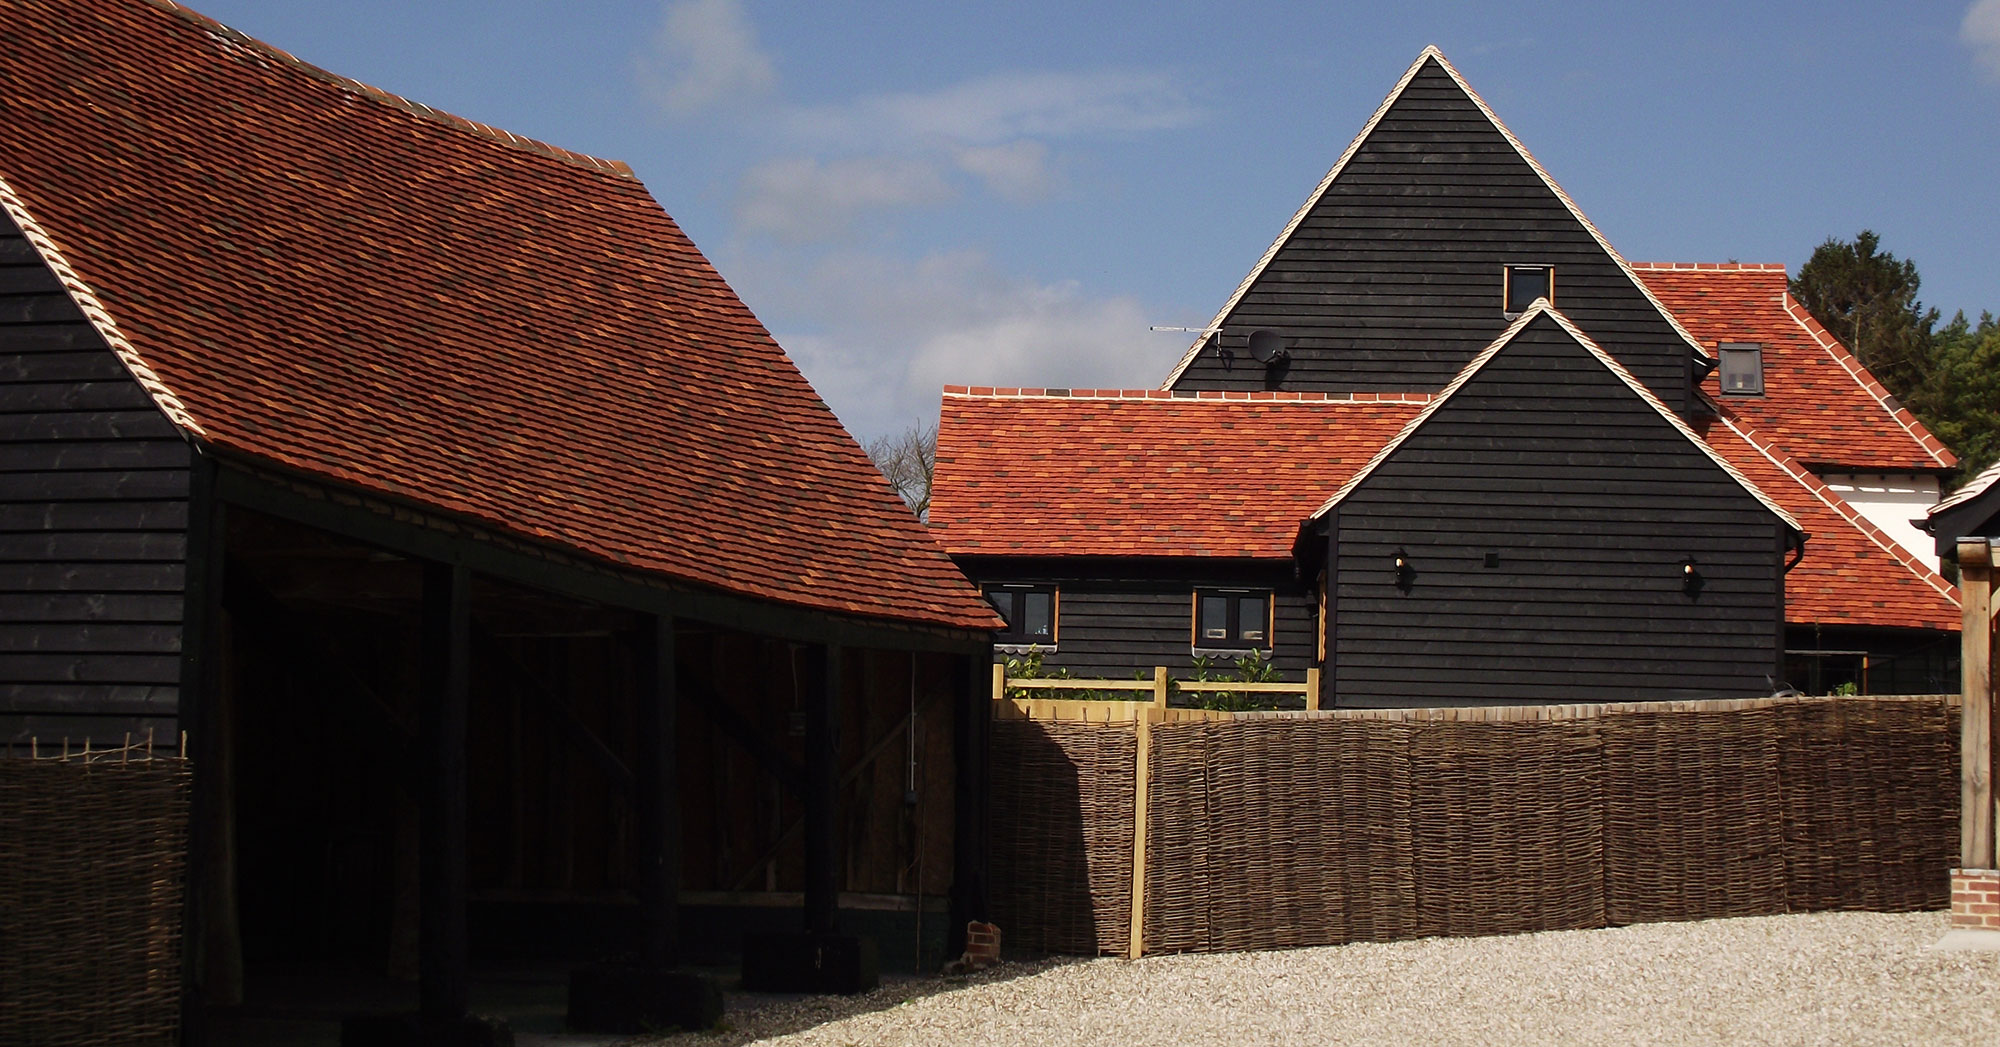 Barn conversion featuring handmate clay roof tiles